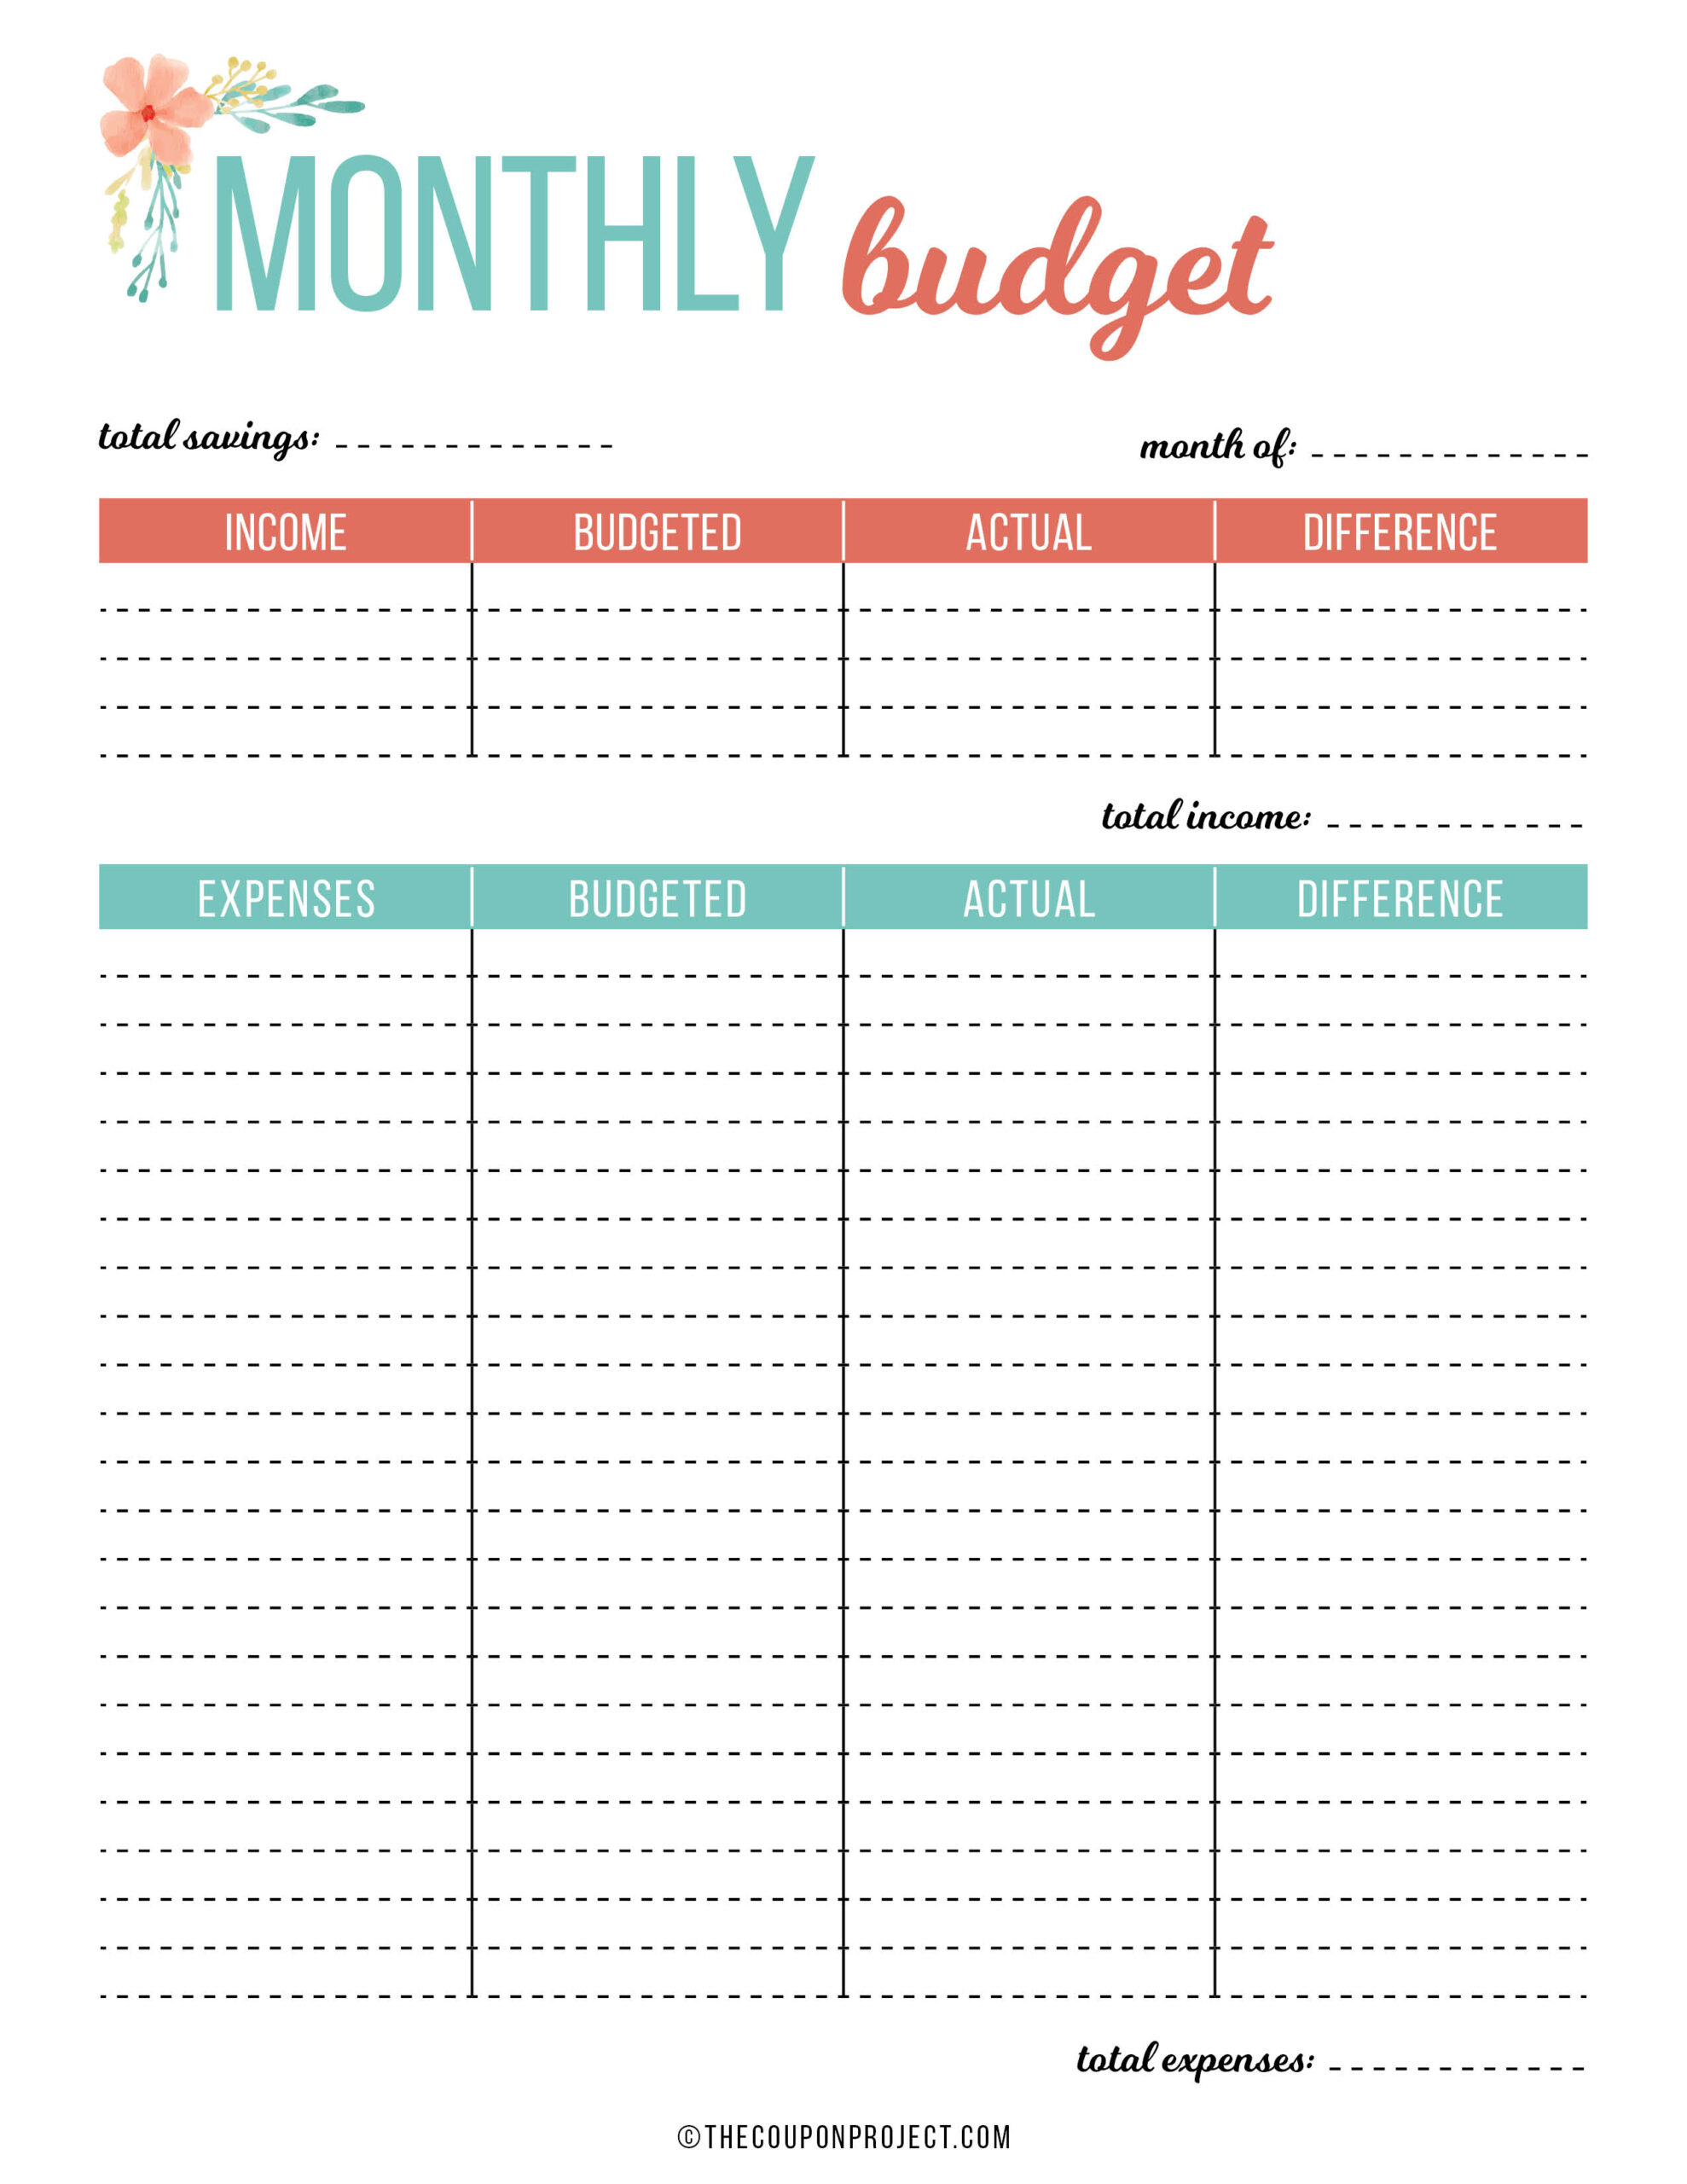 Free Budget and Financial Planning Printables - The Coupon Project In Financial Planning Budget Template Intended For Financial Planning Budget Template